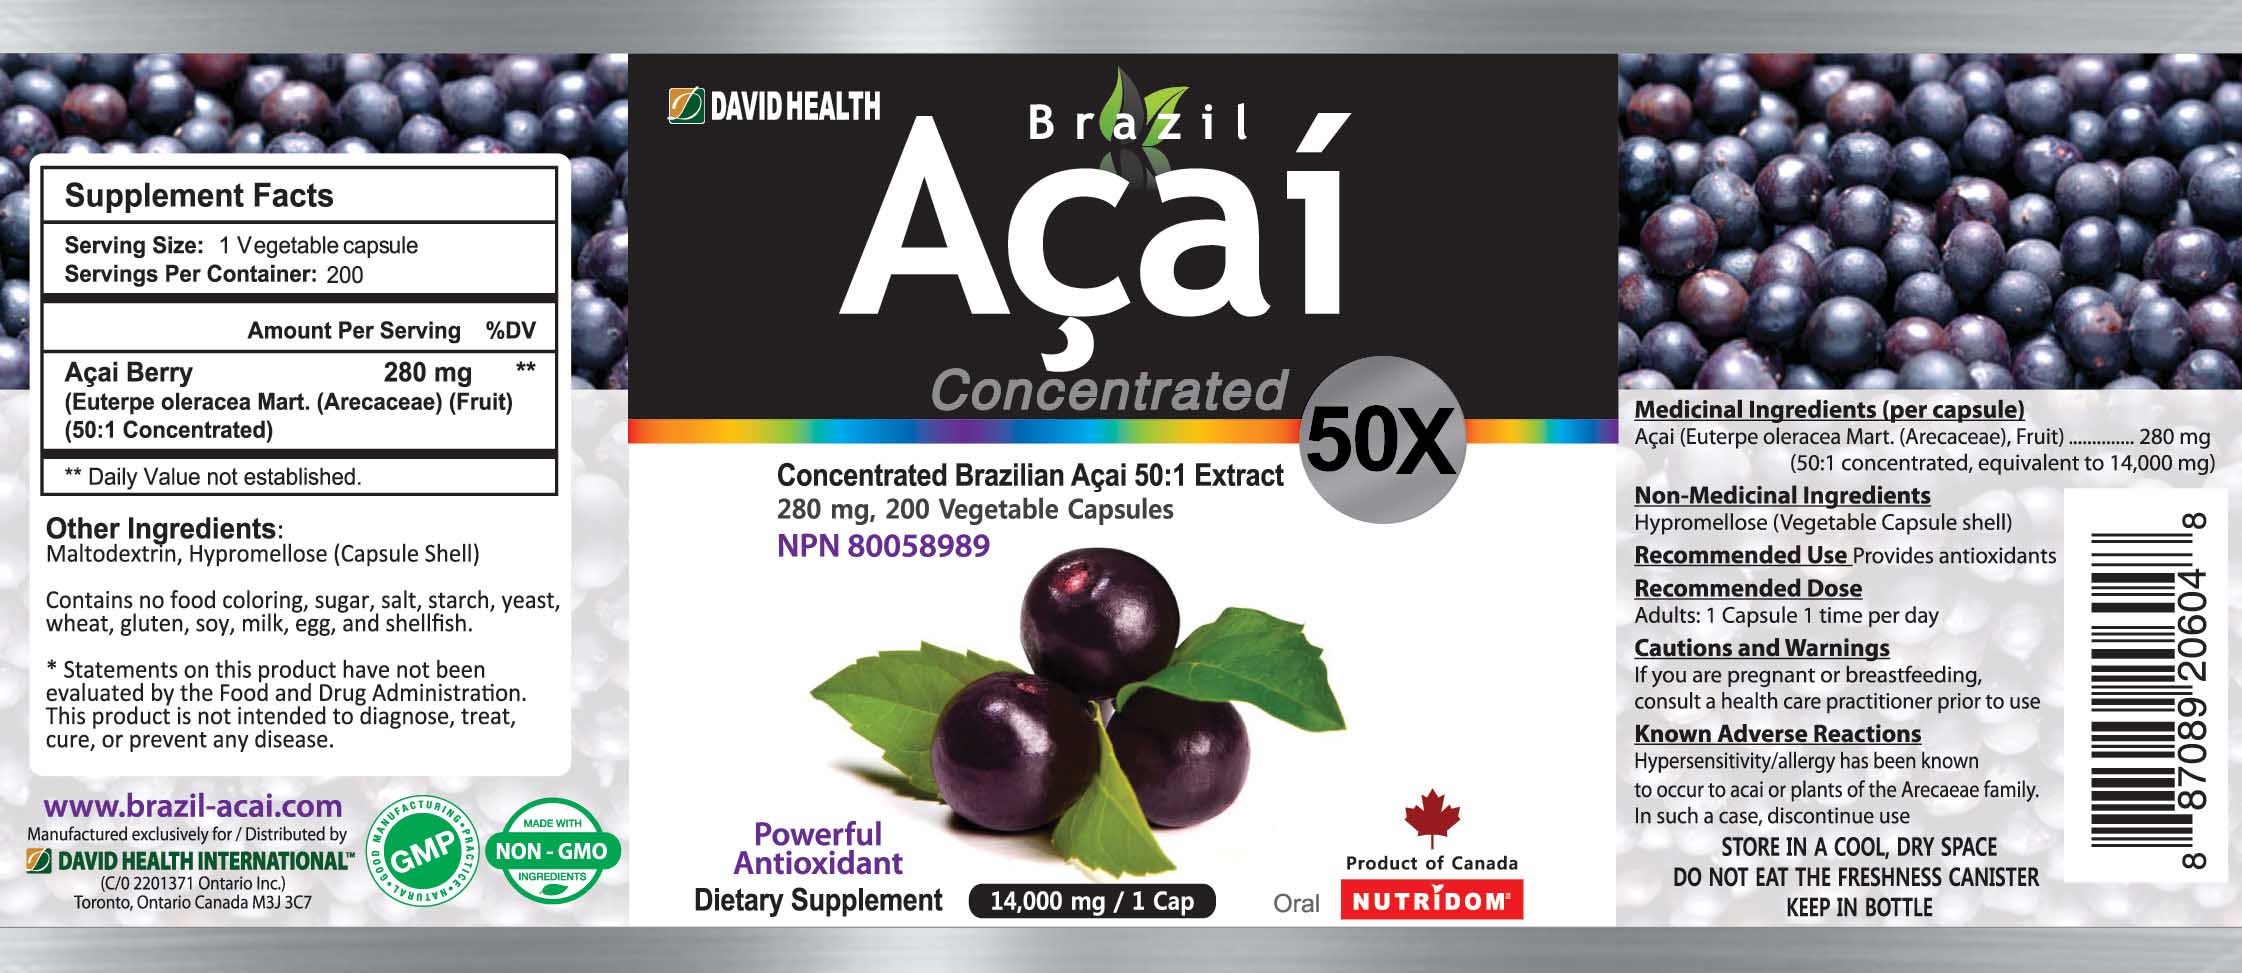 BRAZIL ACAI 50X CONCENTRATED CAPSULE (280MG, 200CAPSULES)